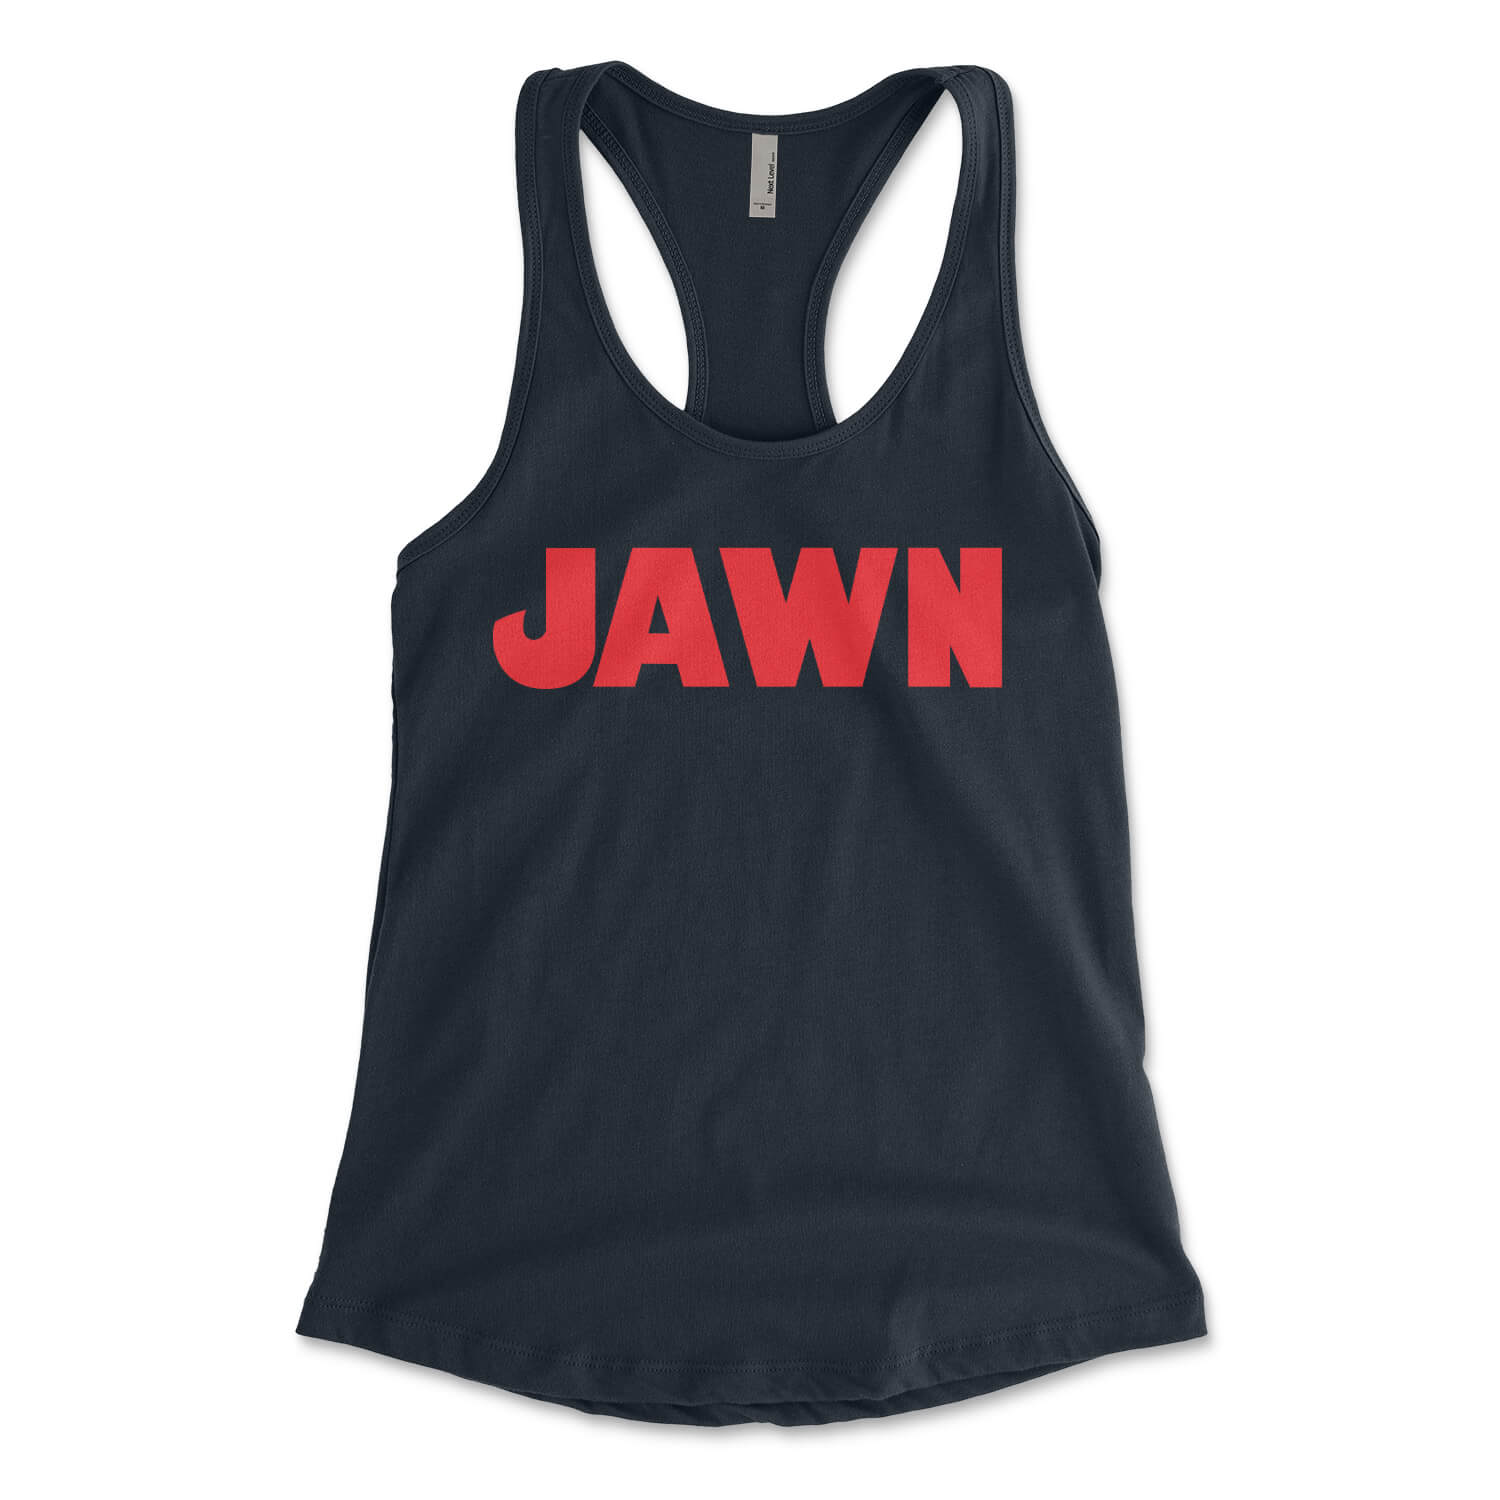 Philadelphia jawn Jaws design on a midnight navy blue womens racerback tank top from Phillygoat